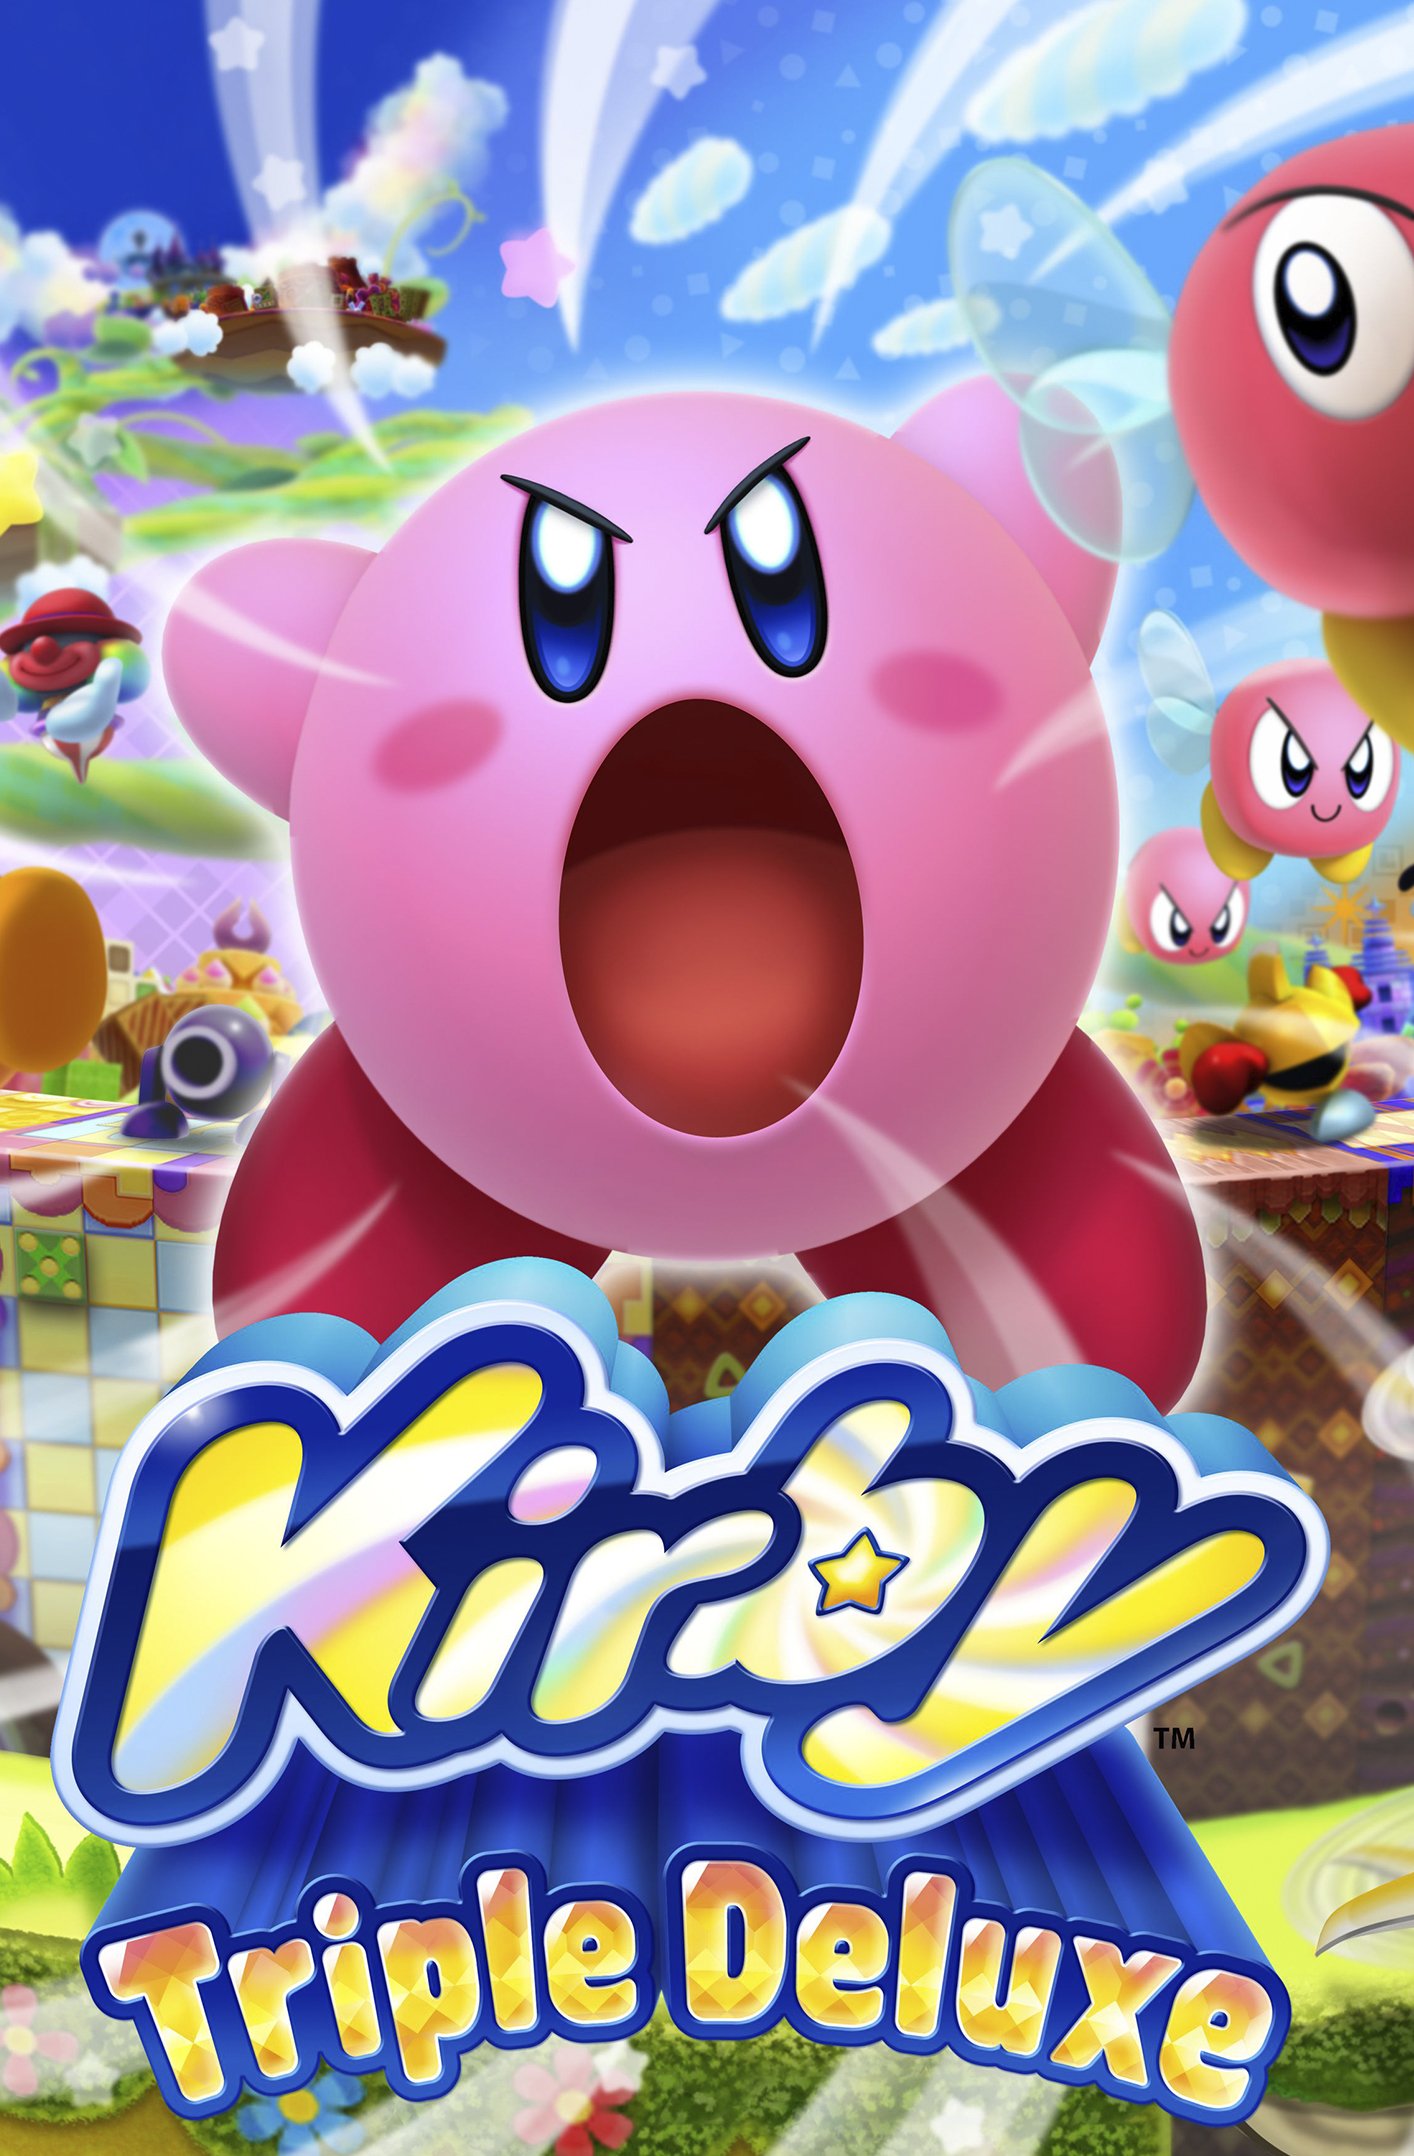 Image of Kirby Triple Deluxe